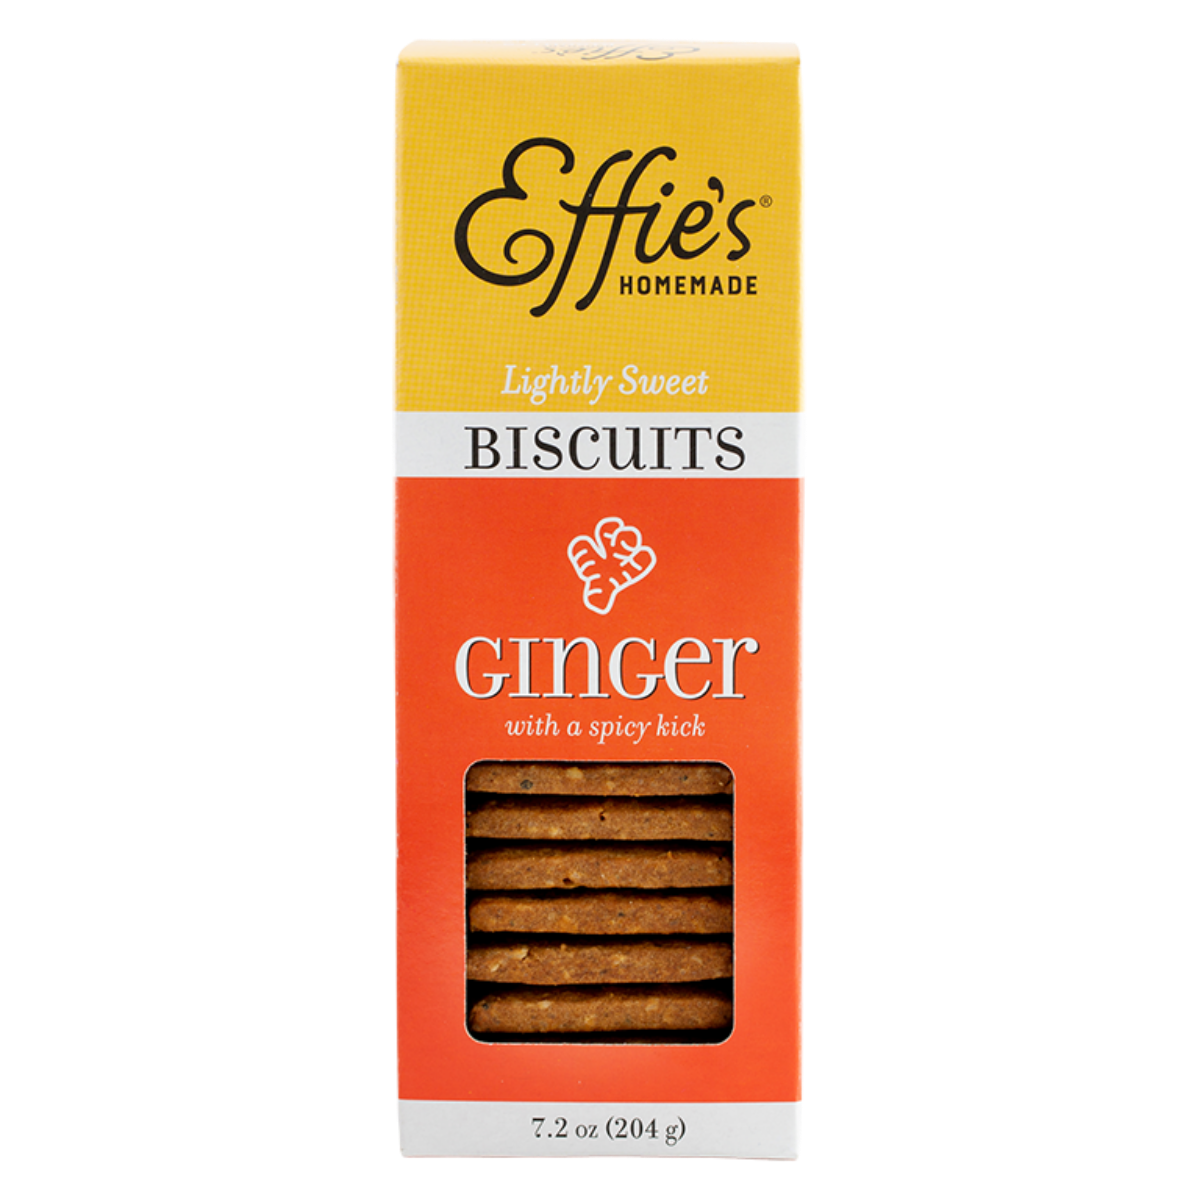 Ginger Biscuit- Add to your next cheese board